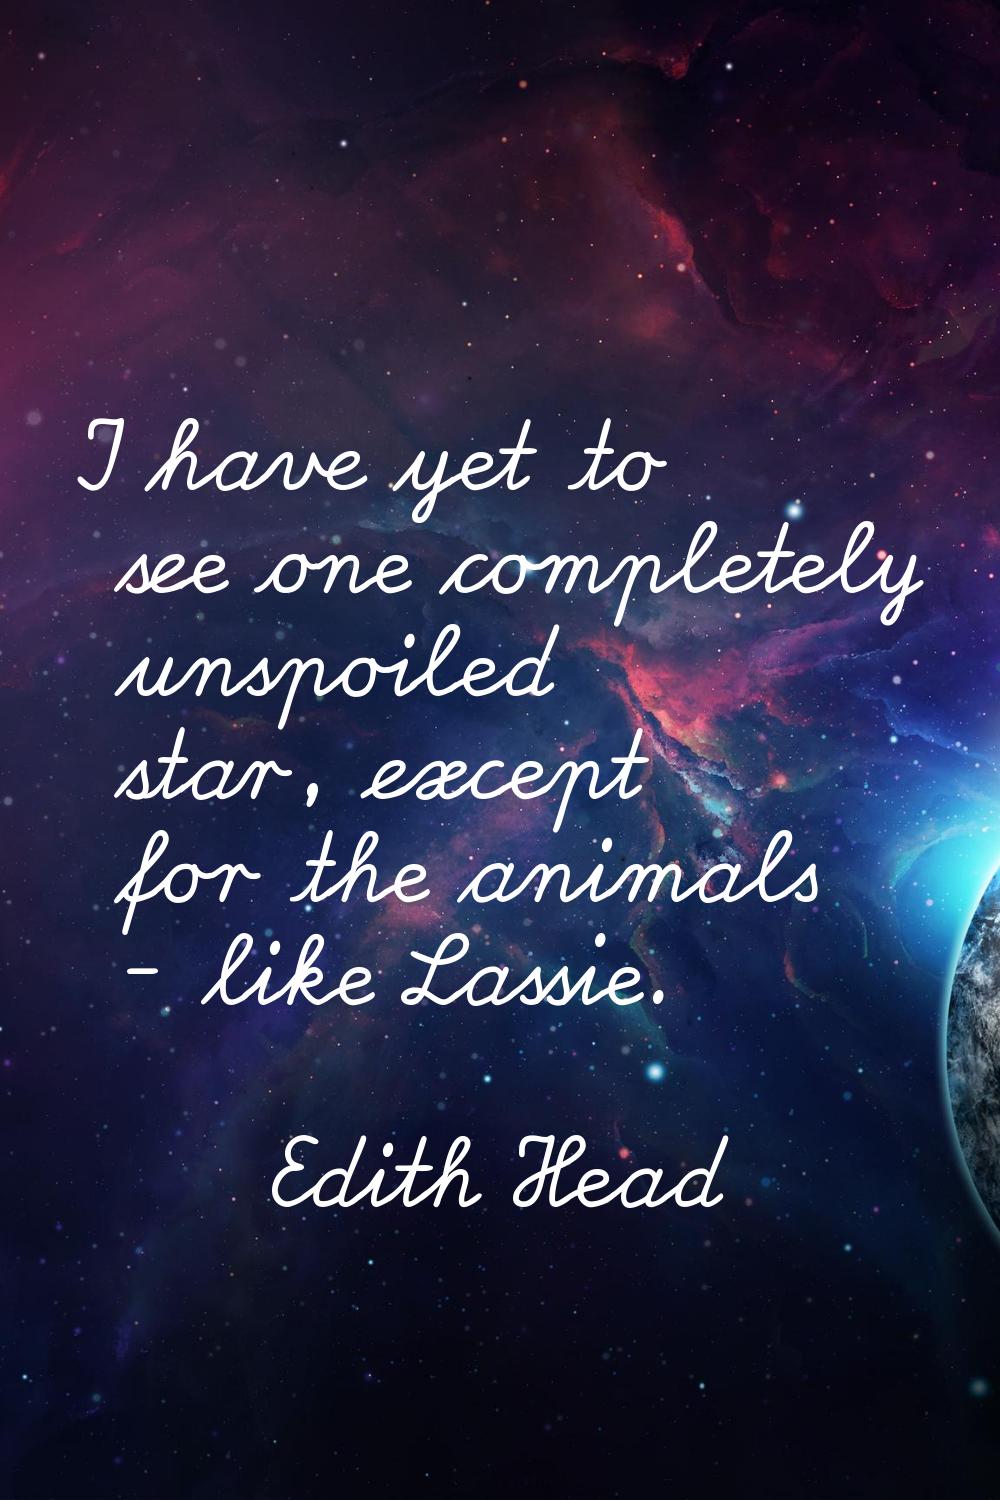 I have yet to see one completely unspoiled star, except for the animals - like Lassie.